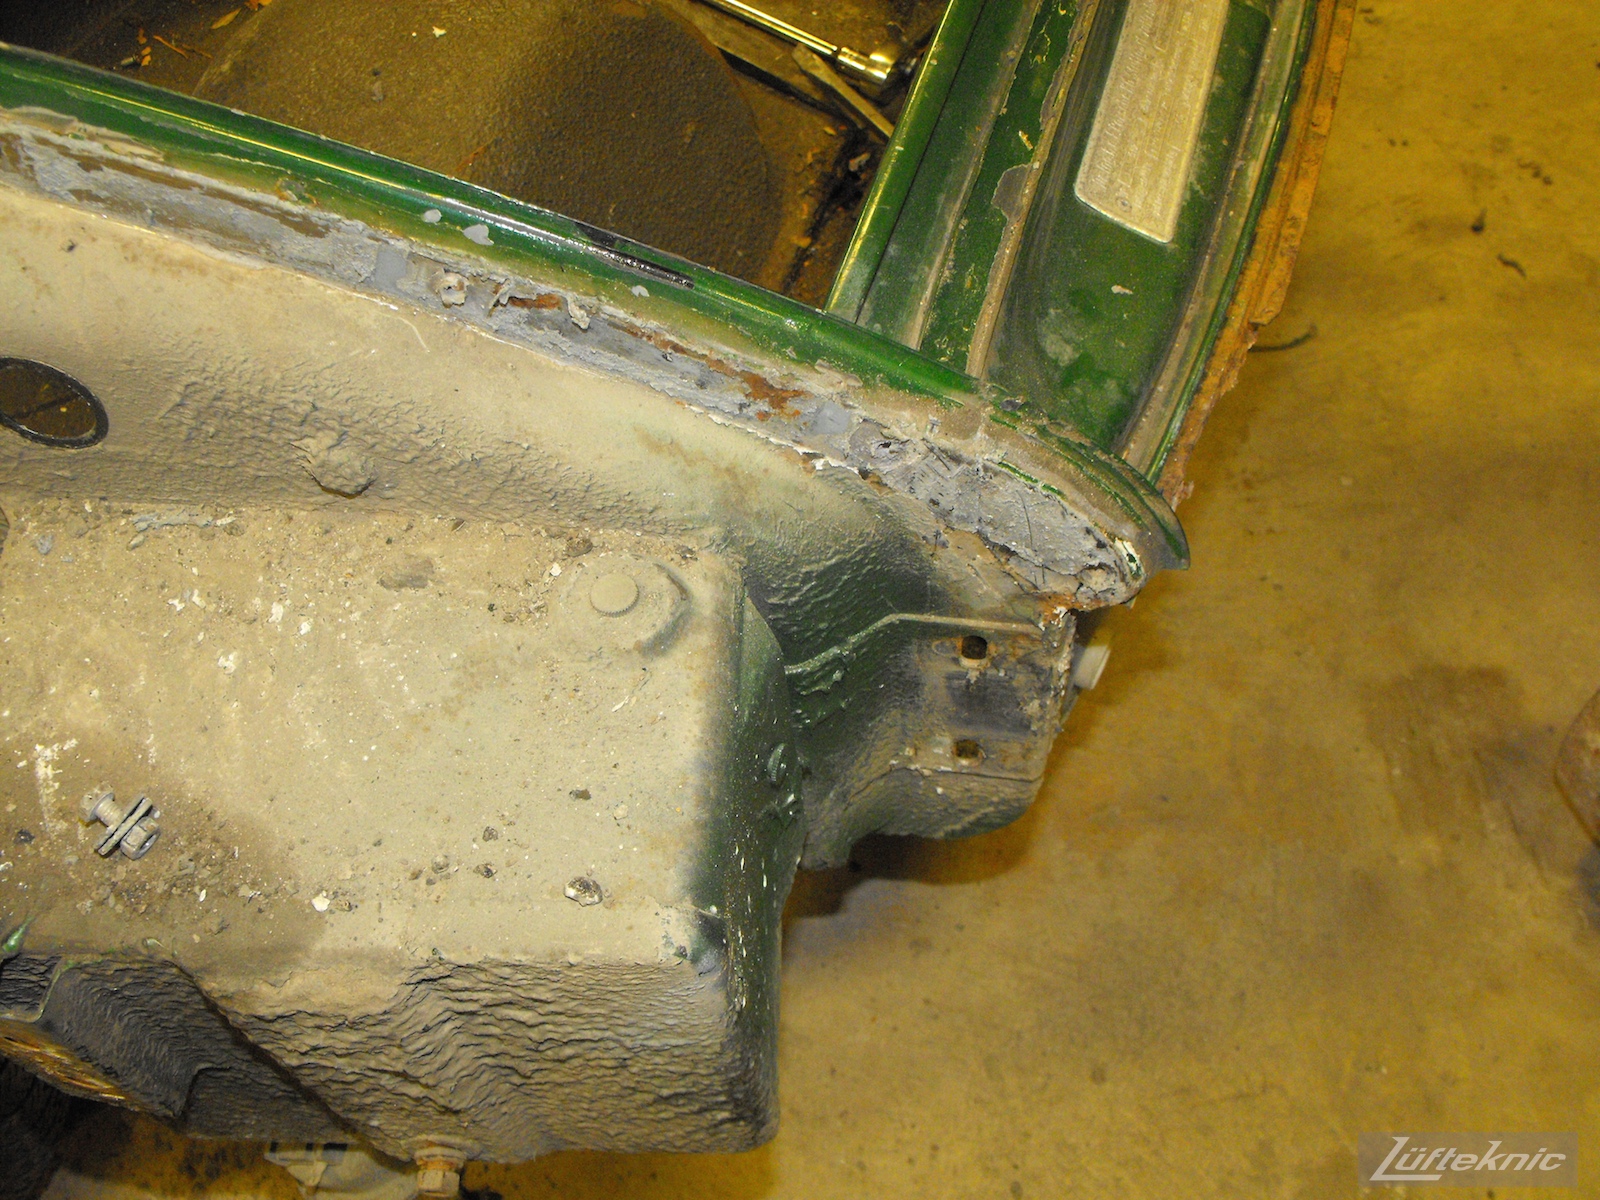 Front chassis wear and some rust on an Irish Green Porsche 912 undergoing restoration at Lufteknic.